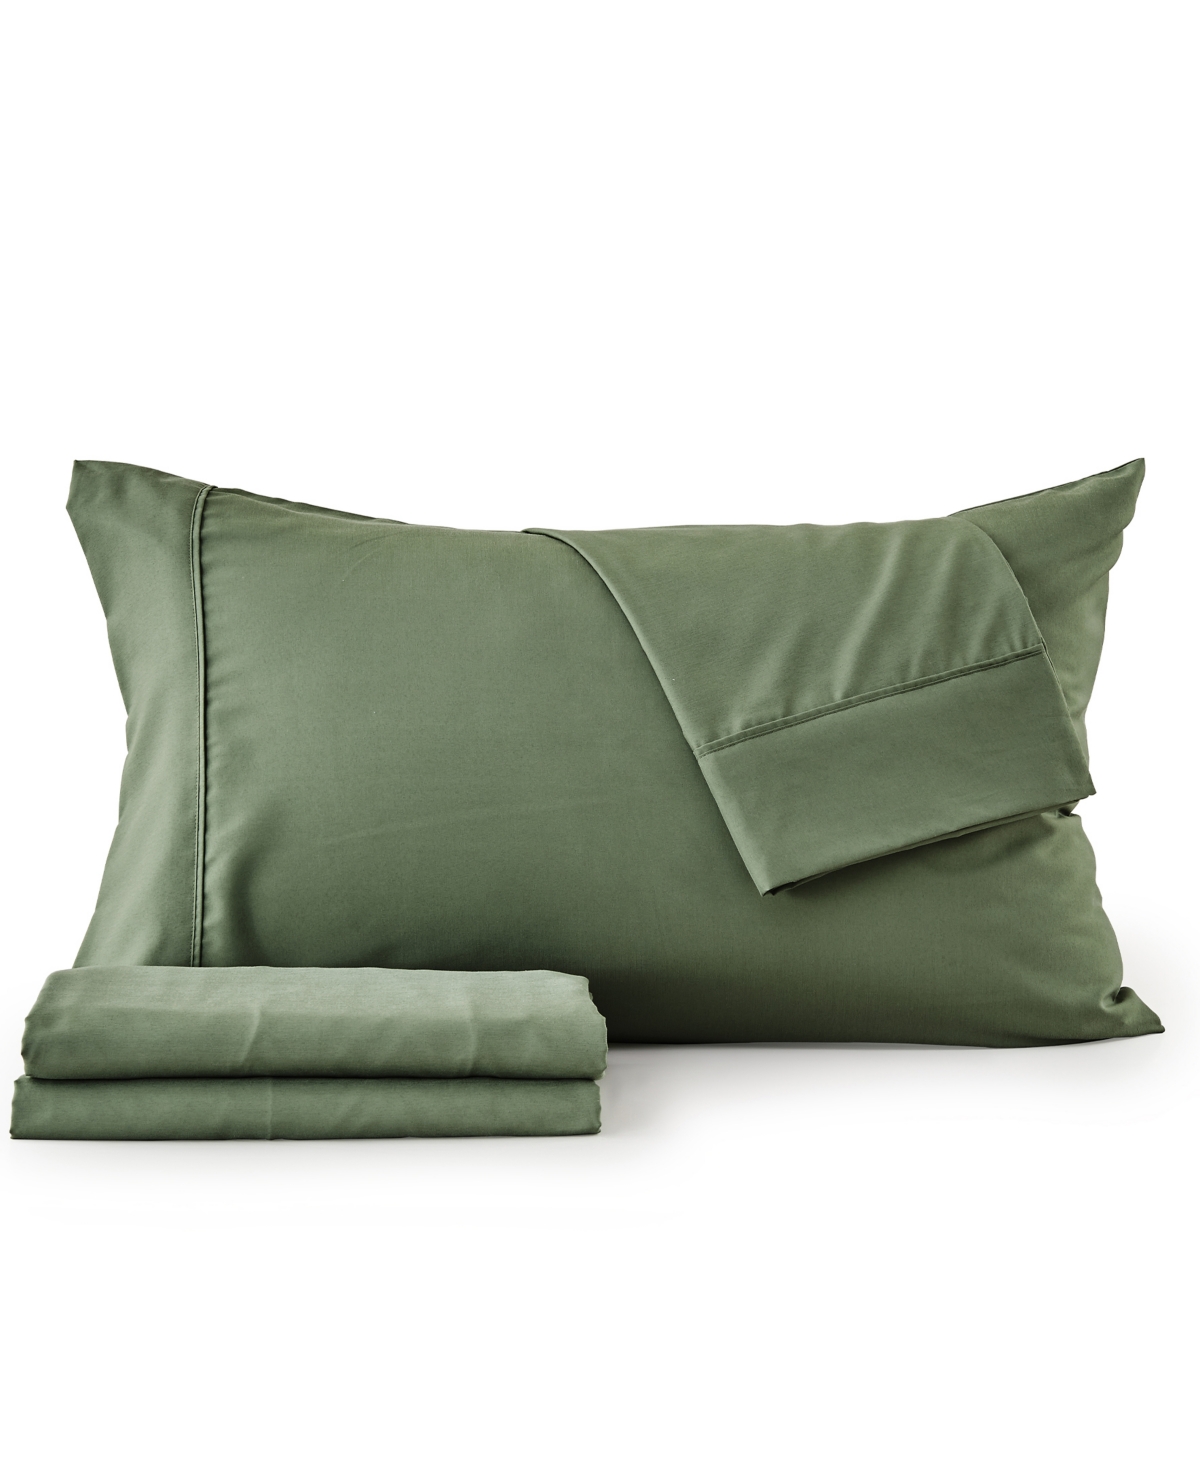 Premium Comforts Rayon From Bamboo Blend Crease-resistant 4 Piece Sheet Set, Queen In Moss